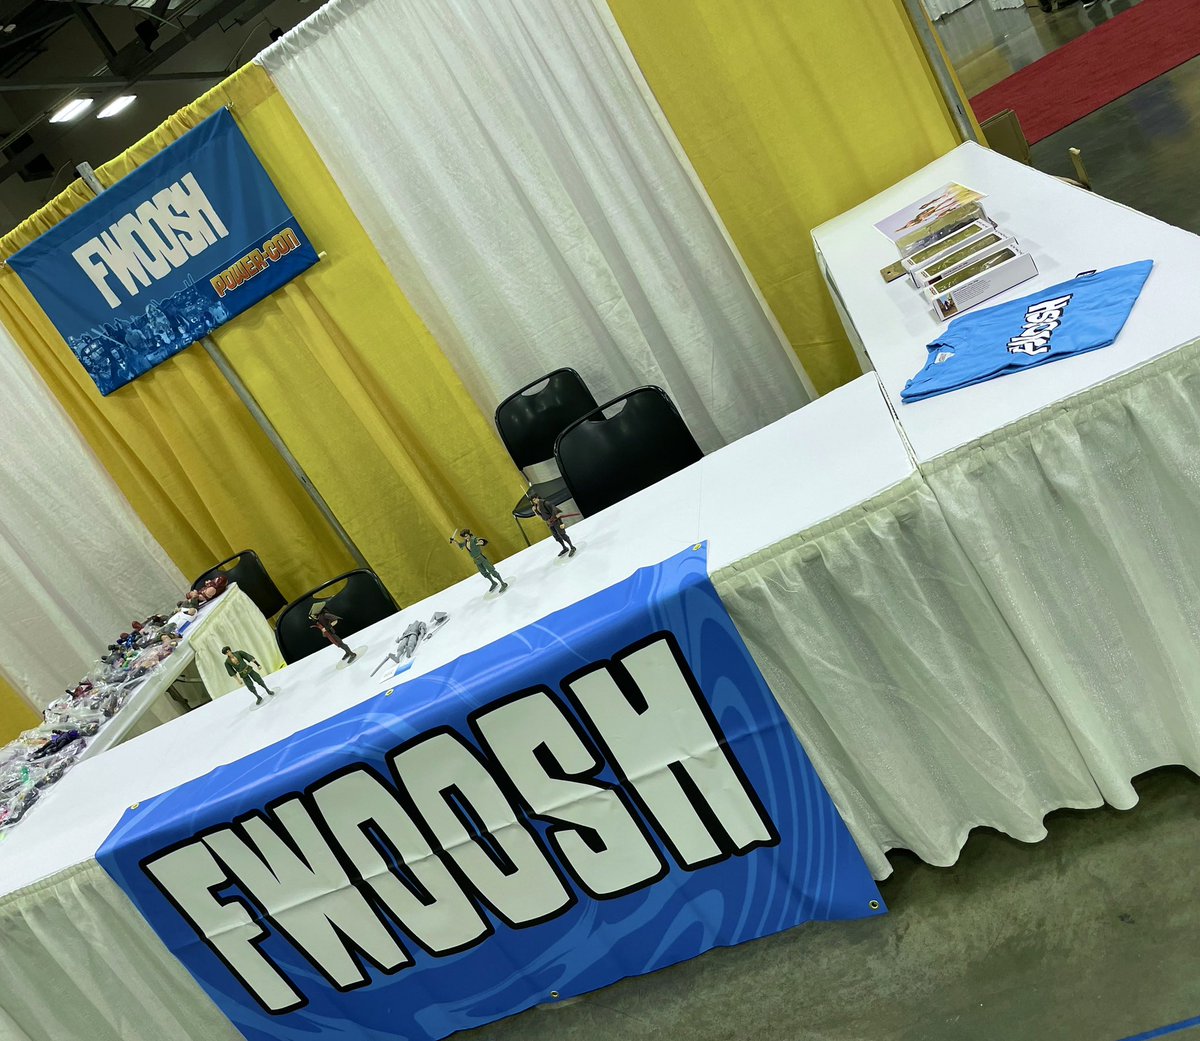 The @ThePowerCon begins in 5 minutes! Stop by and see us!

#powercon #thepowercon #ninjascroll #fwooshtoys